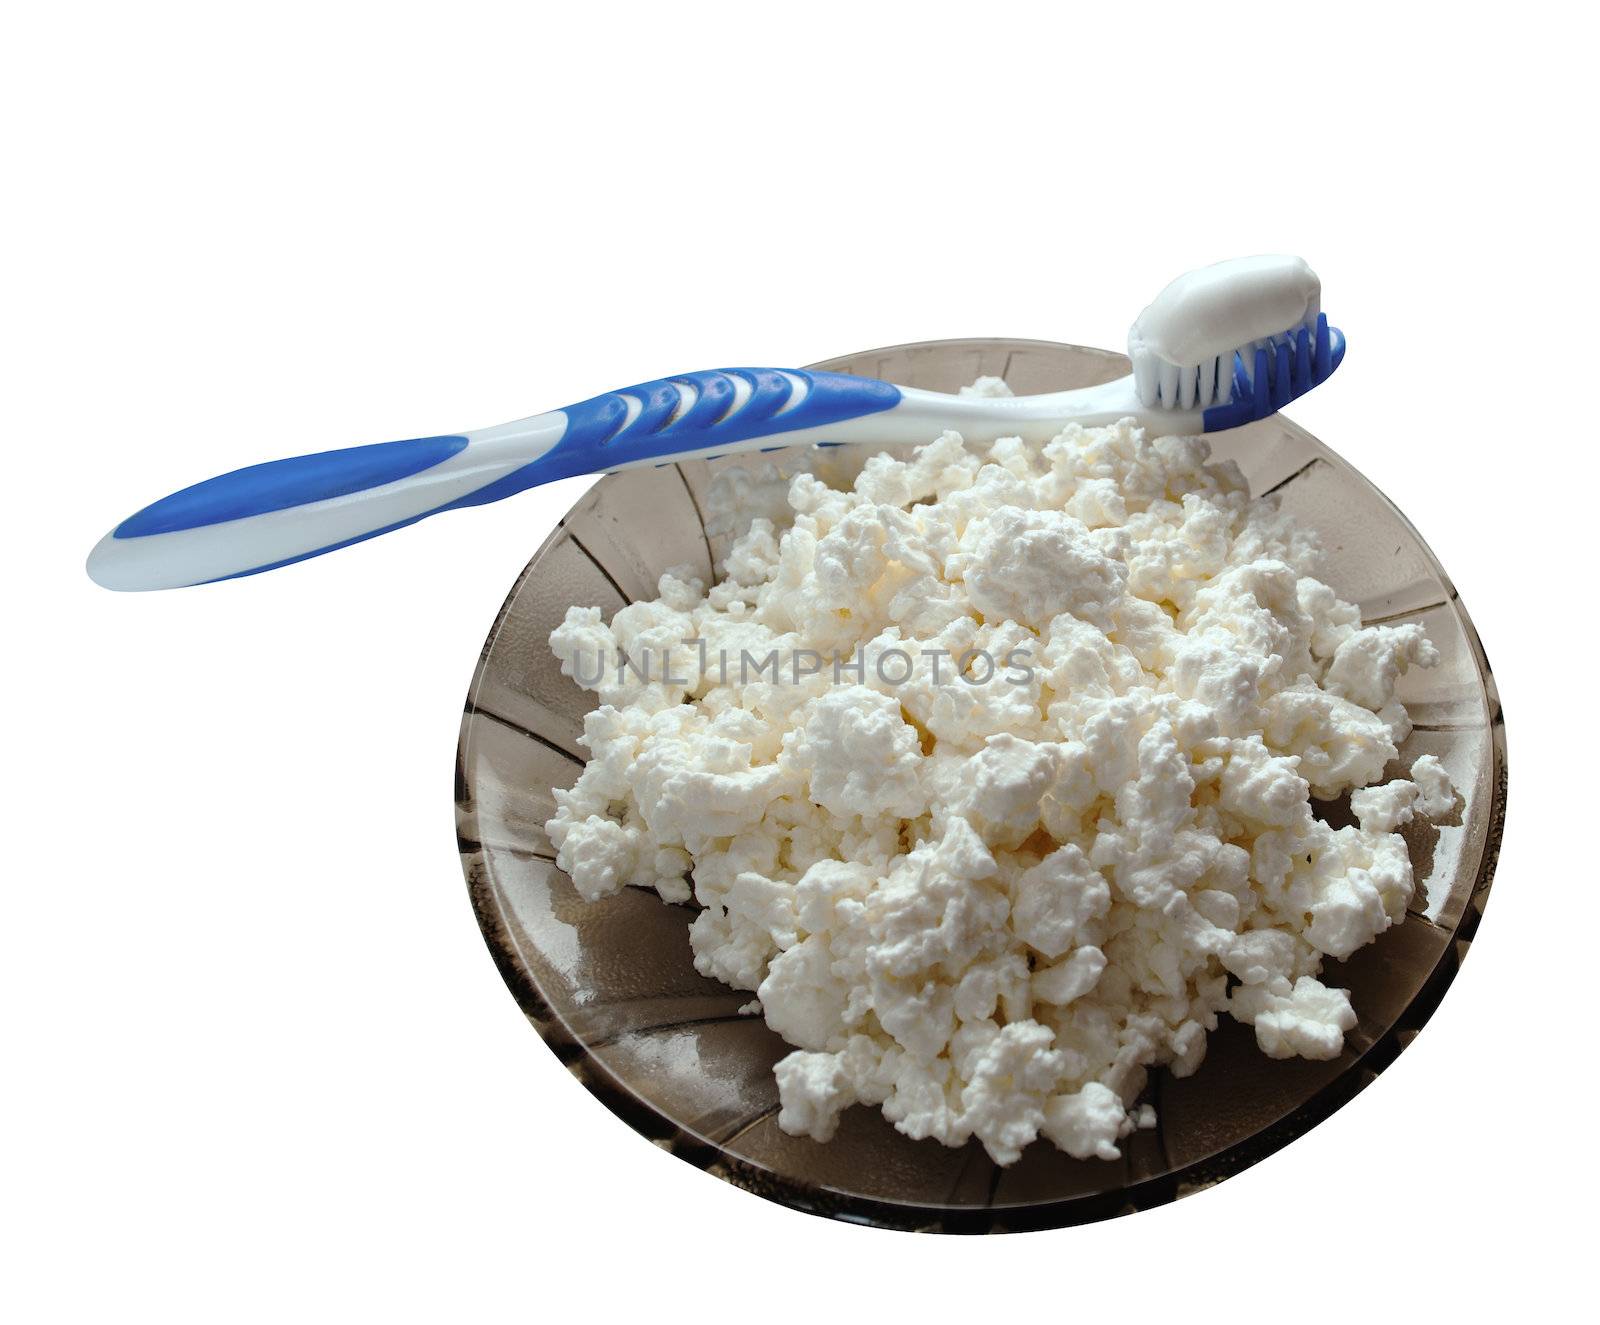 toothbrush, edged massaging bristles made of soft rubber with toothpaste is on a saucer with curds